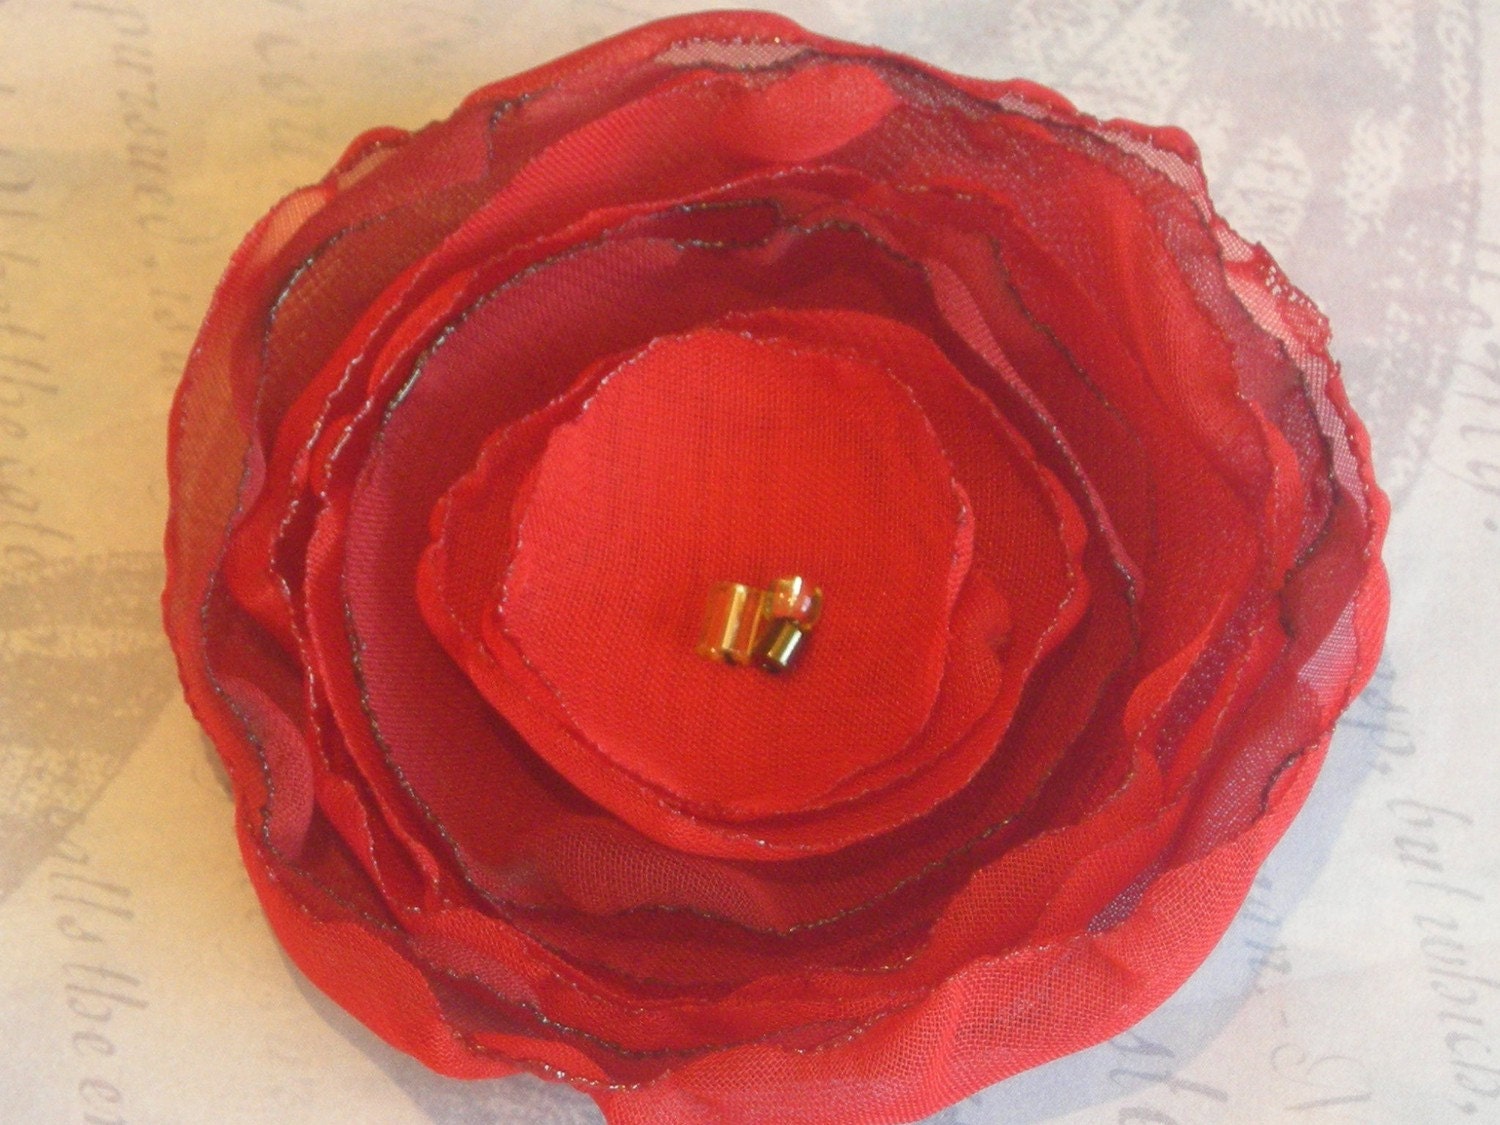 Red rose - chiffon flower clip or brooch